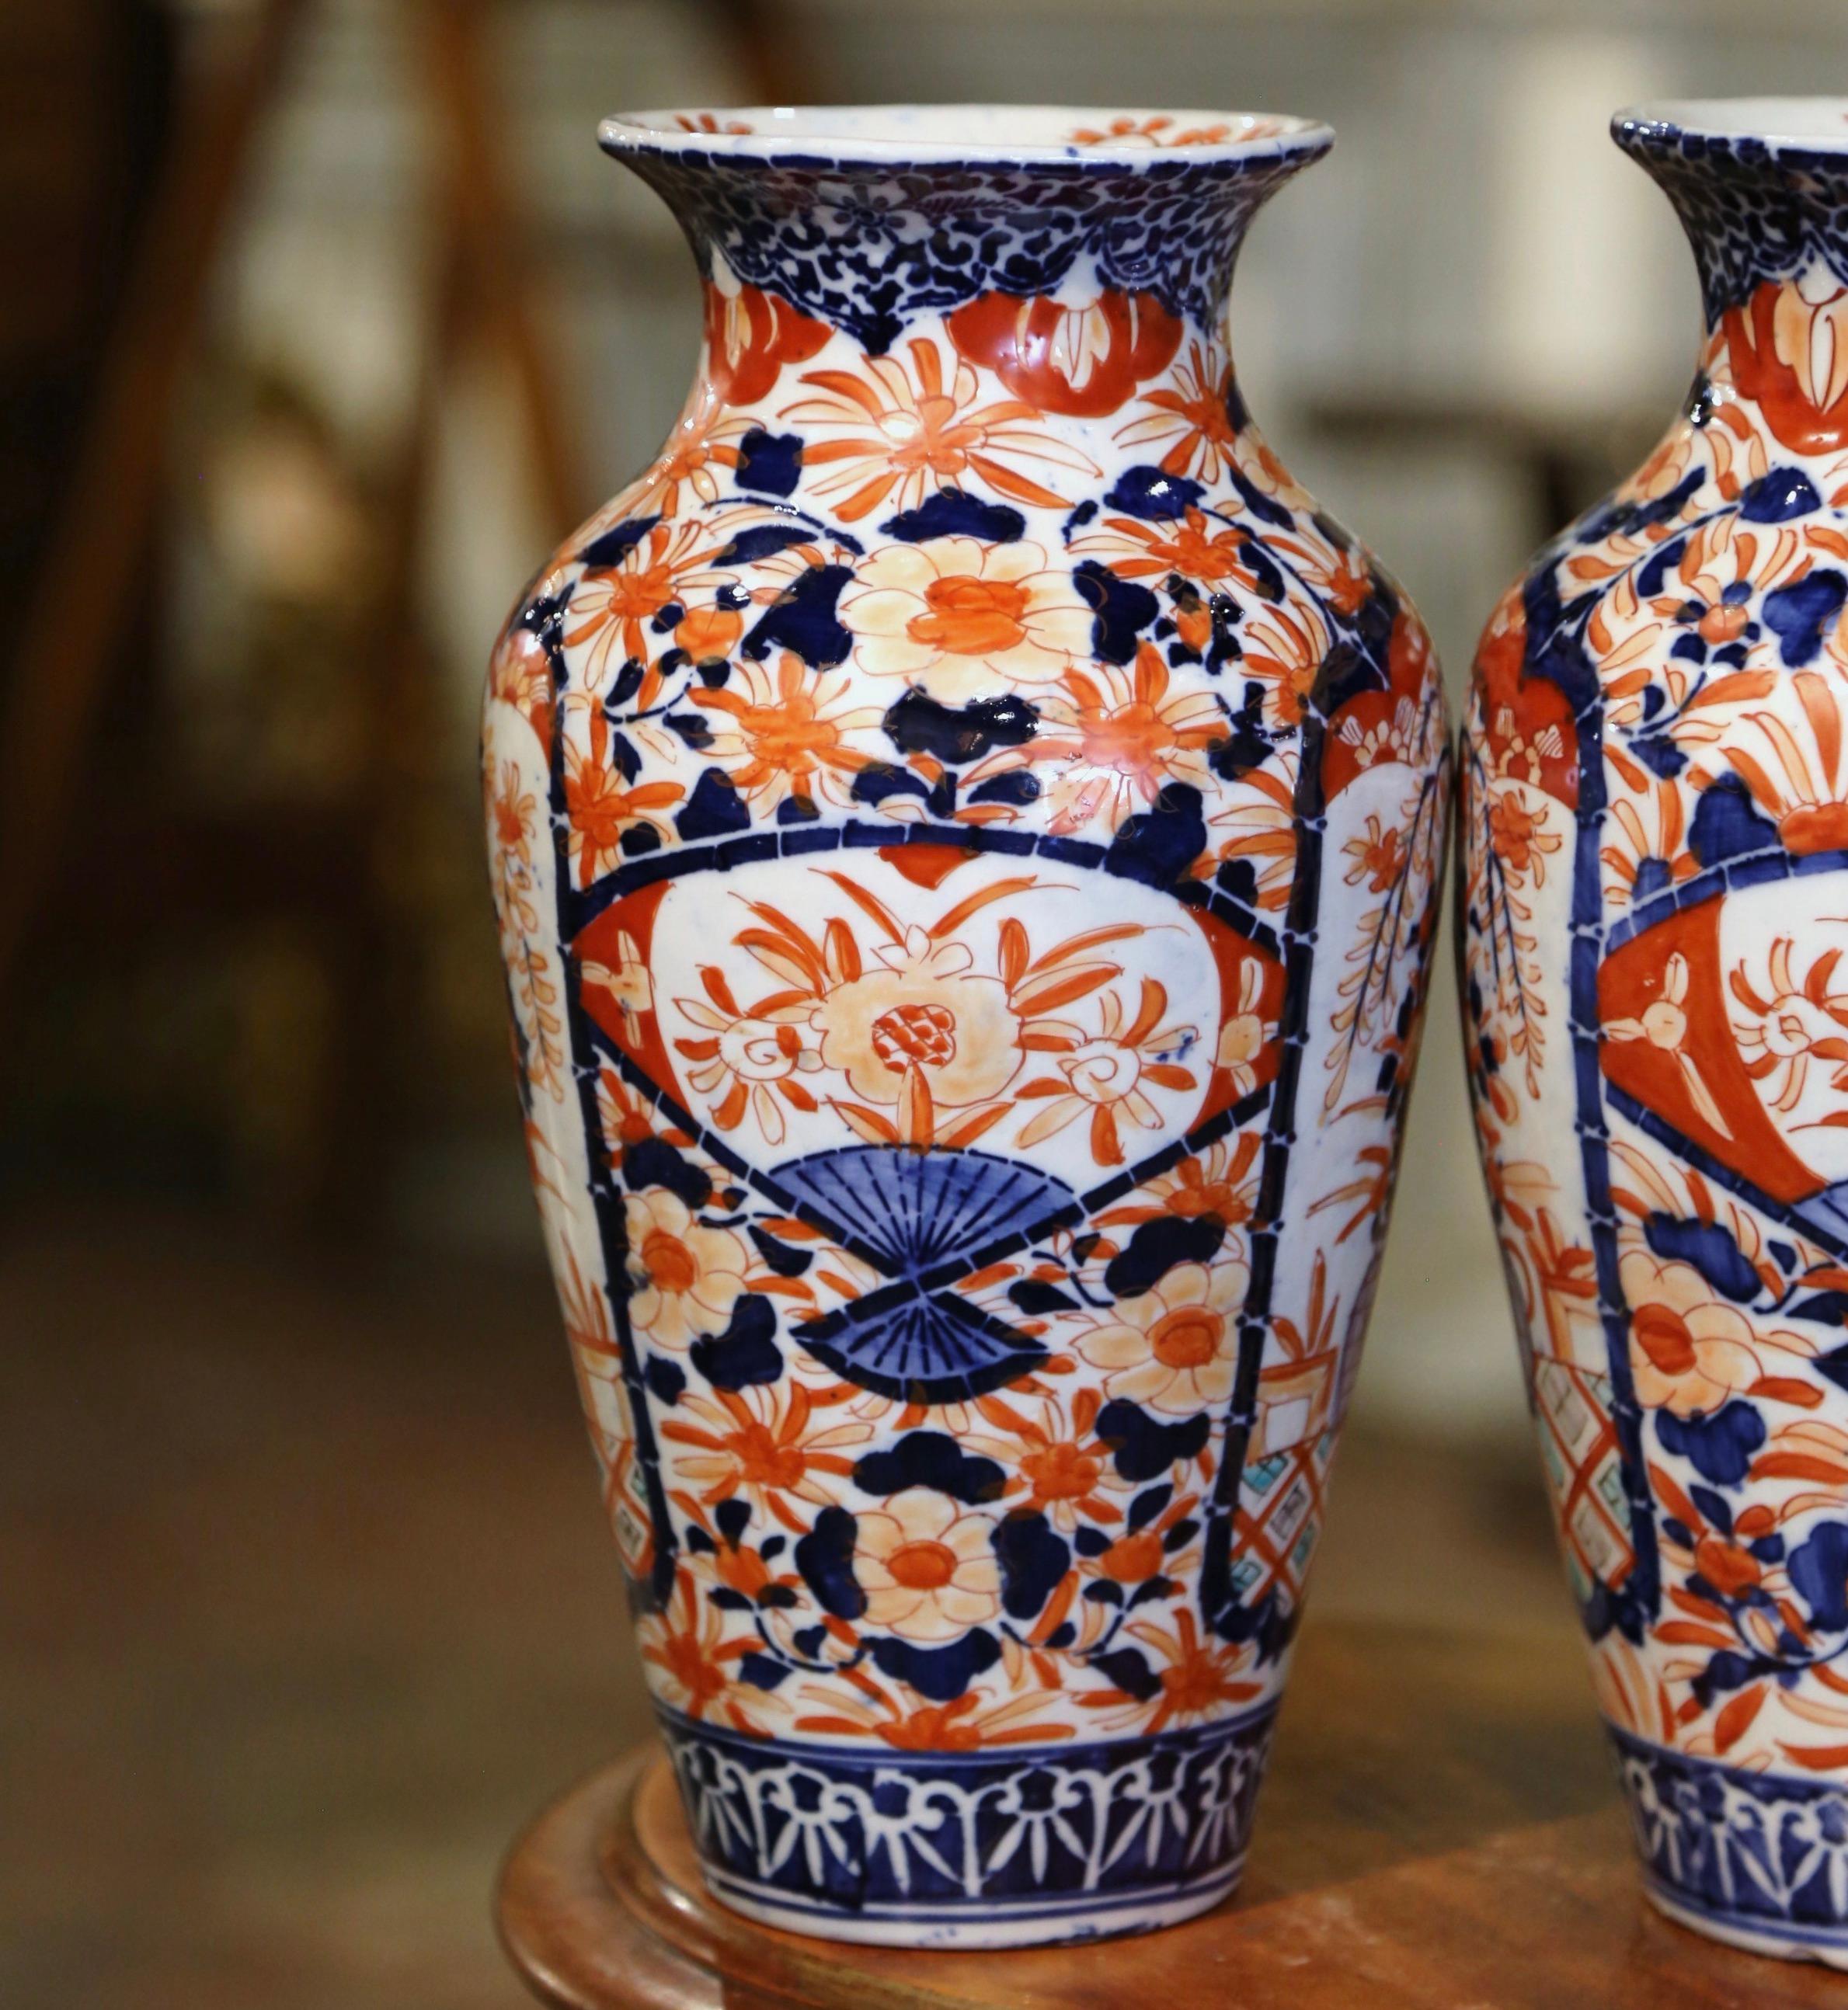 Pair of 19th Century Japanese Porcelain Imari Vases with Floral and Plant Decor For Sale 5